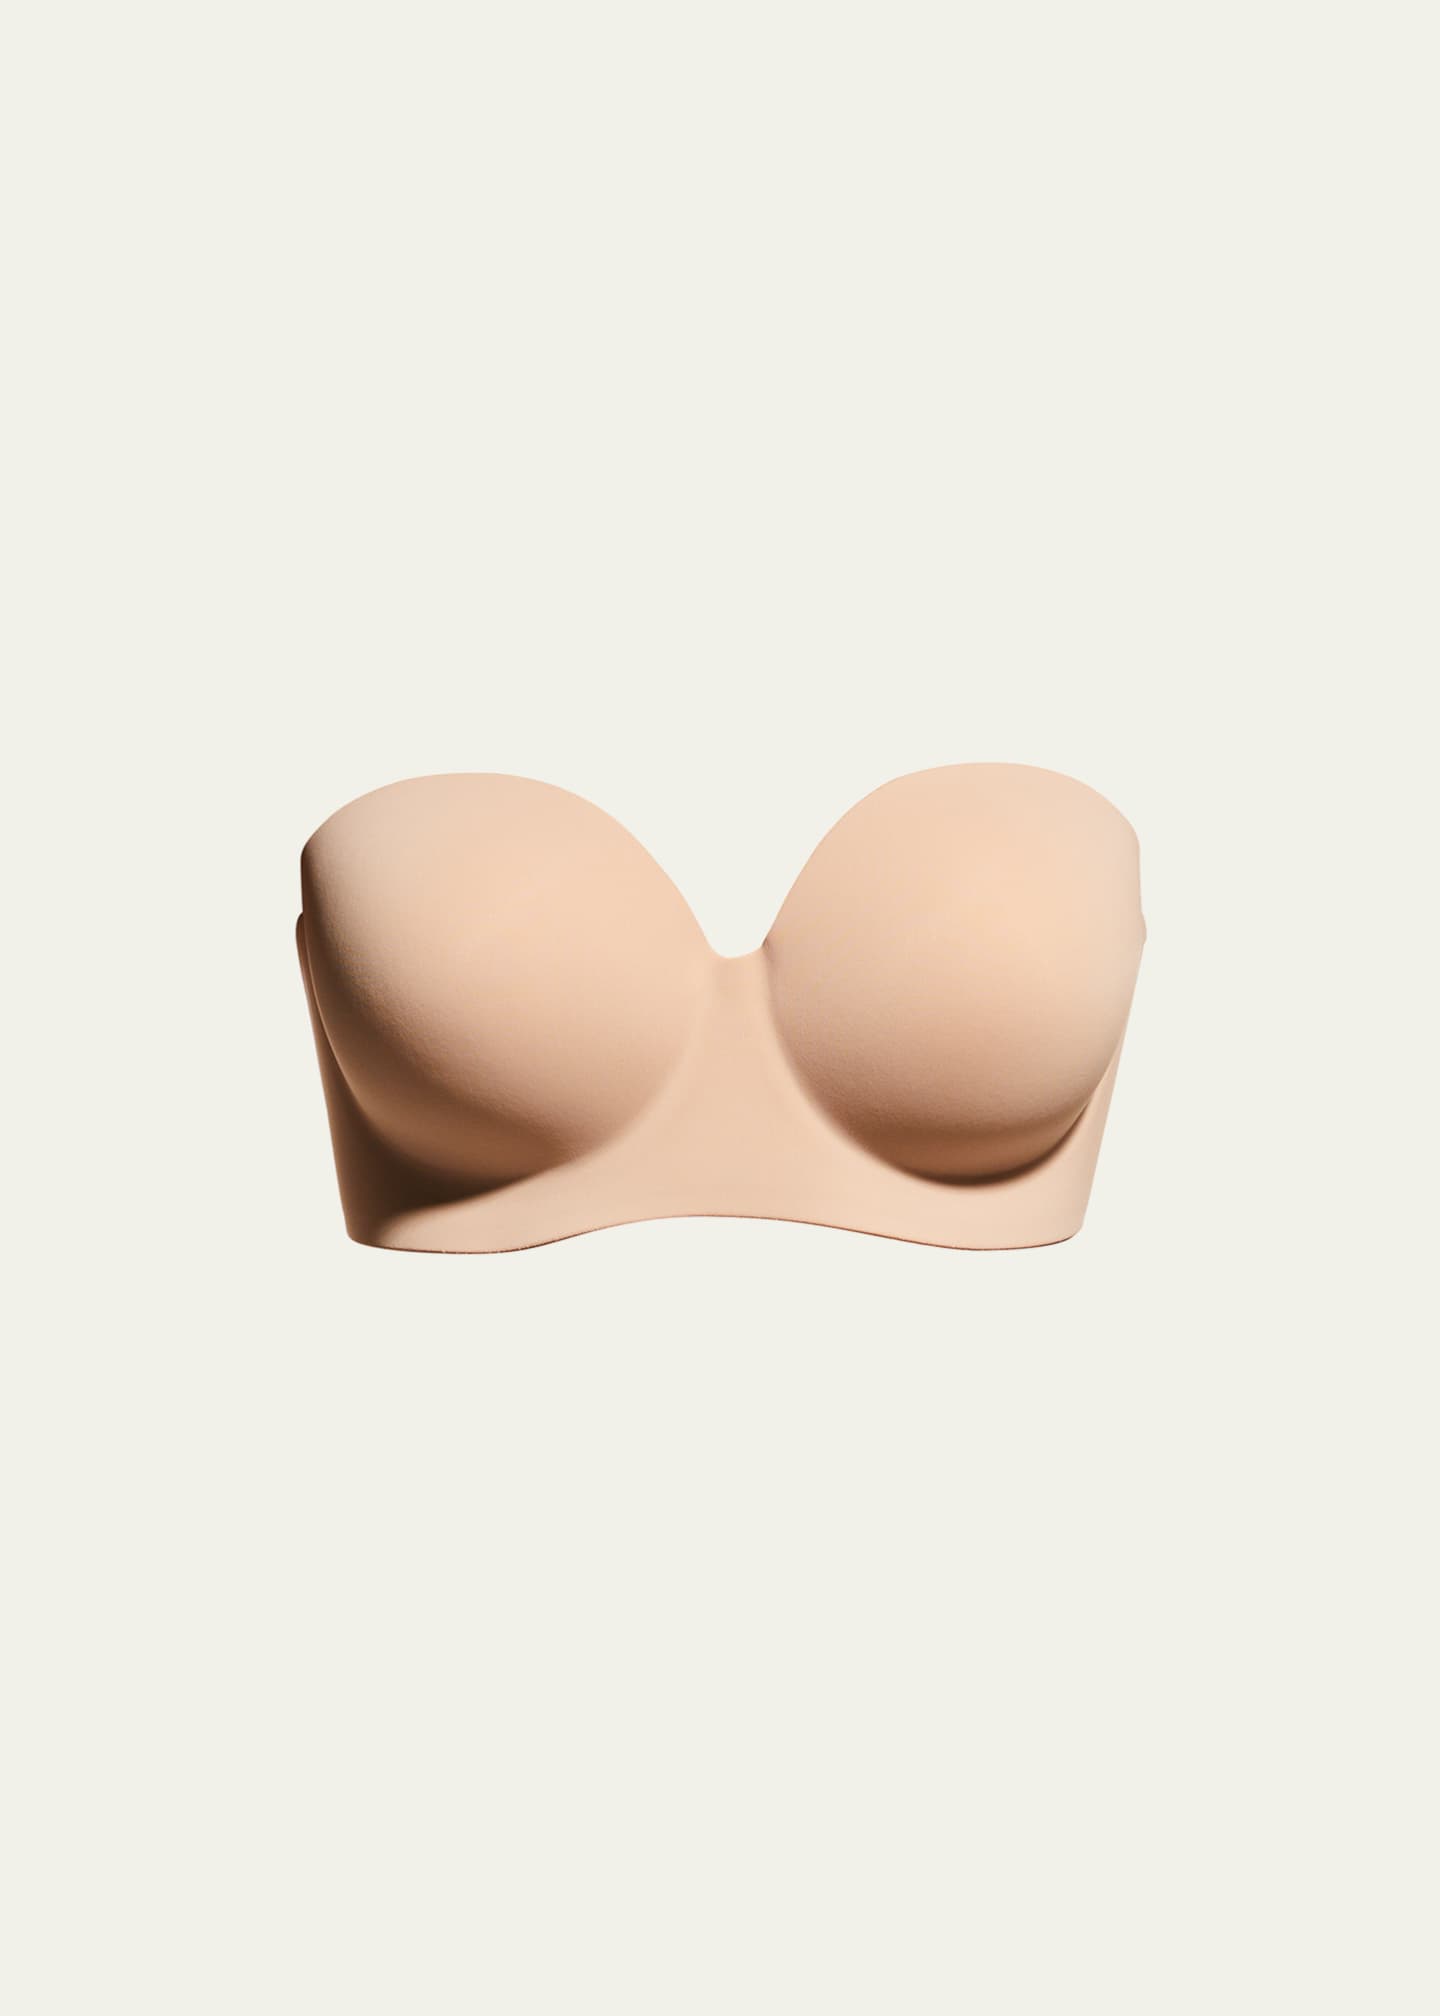 Fashion Forms Volumptuous Backless Strapless Bra  Strapless backless bra,  Strapless bra, Best strapless bra